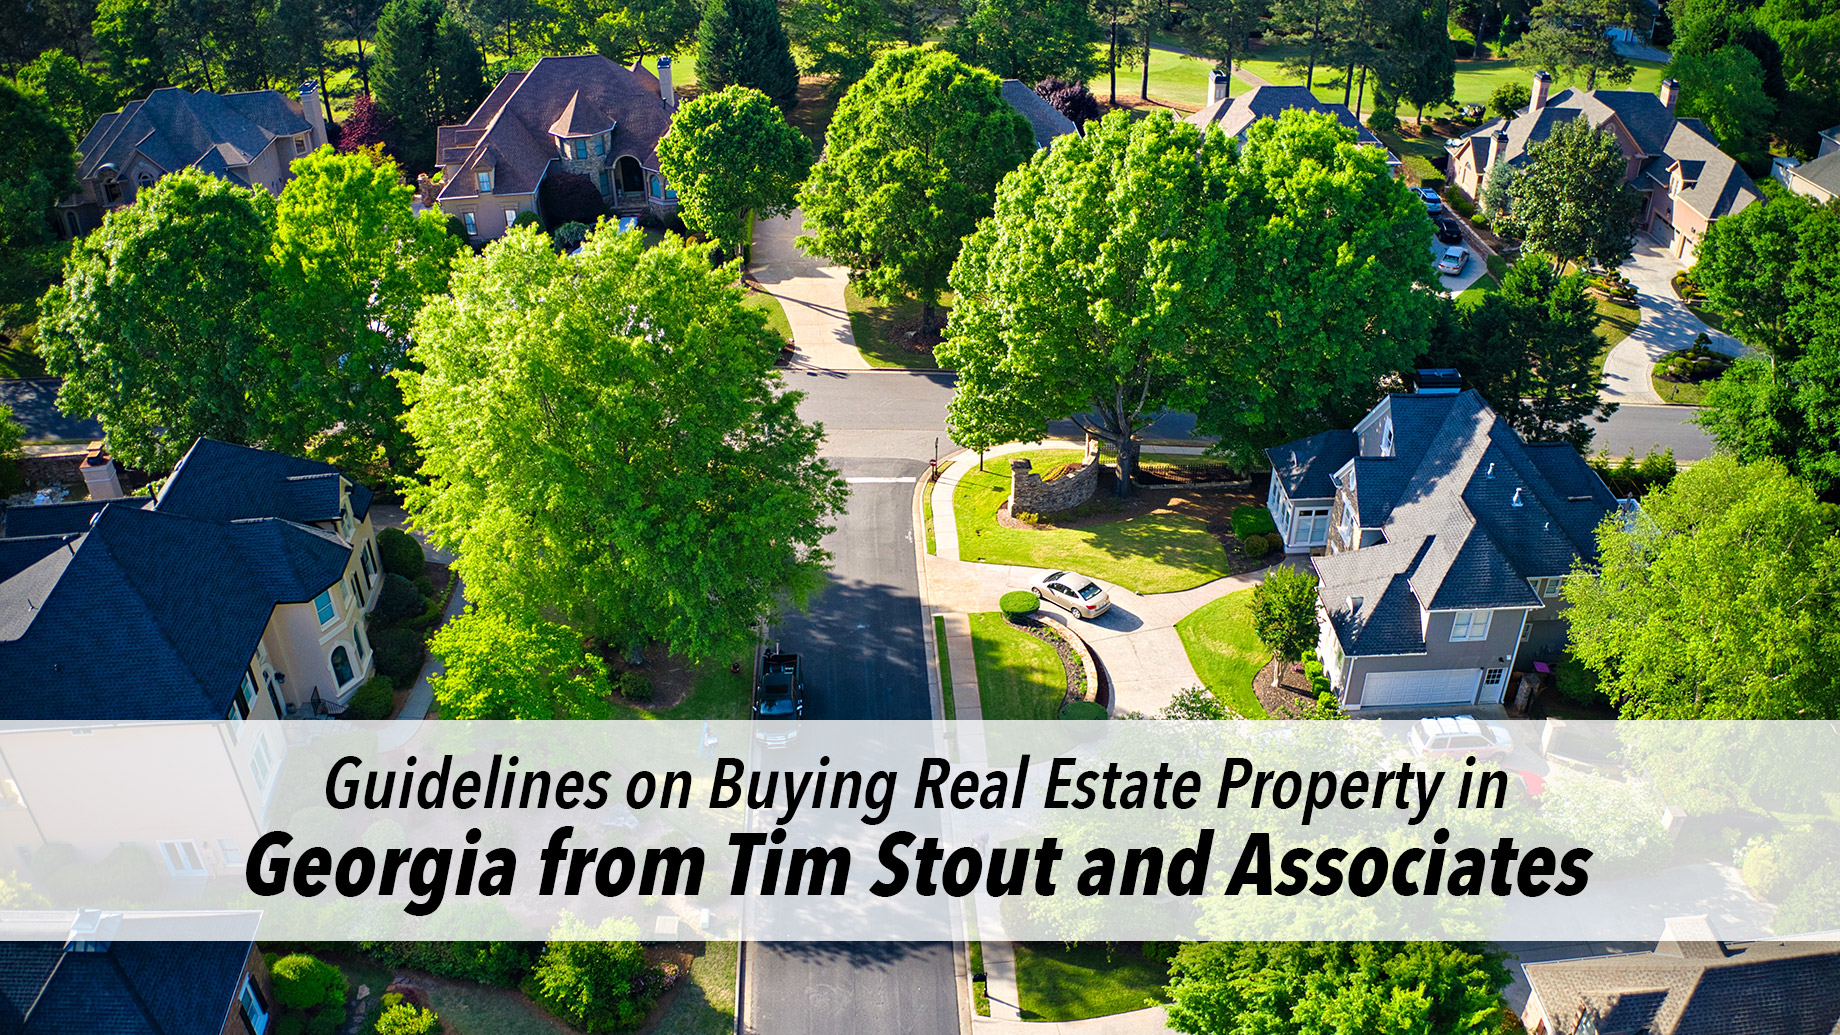 Guidelines on Buying Real Estate Property in Georgia from Tim Stout and Associates